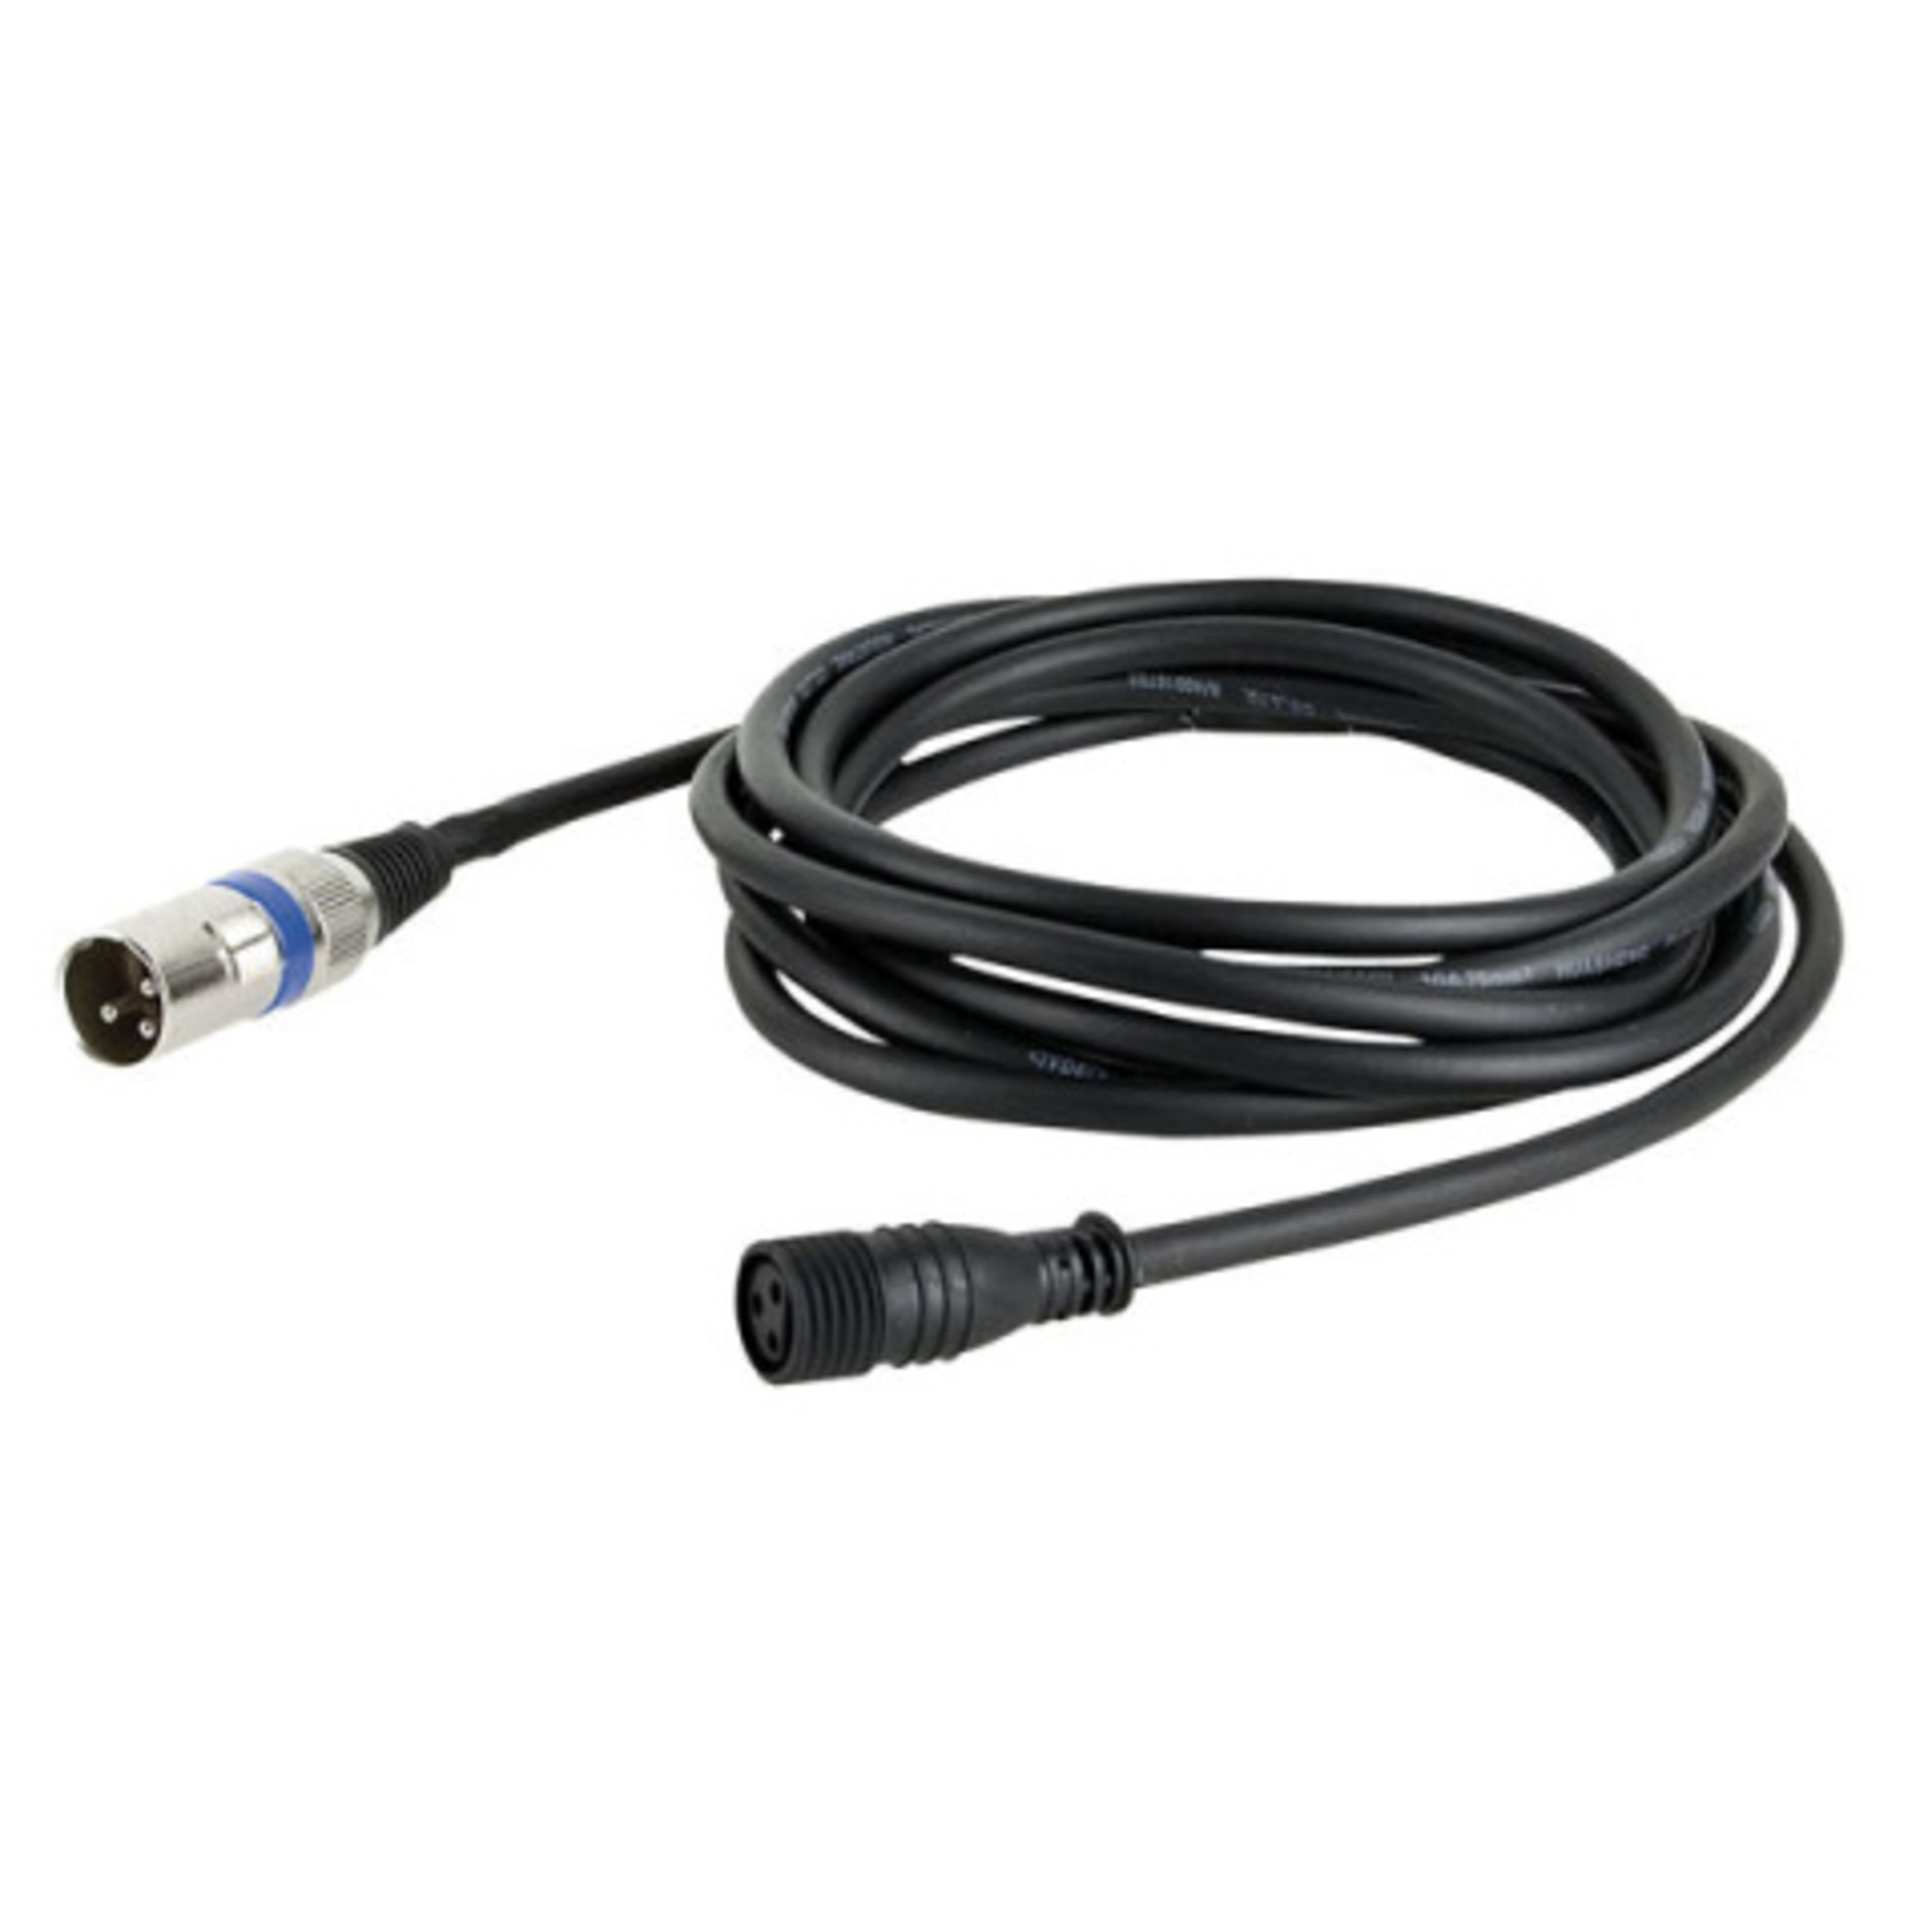 LED Input Discolicht, series Show cable for tec 3m DMX Cameleon